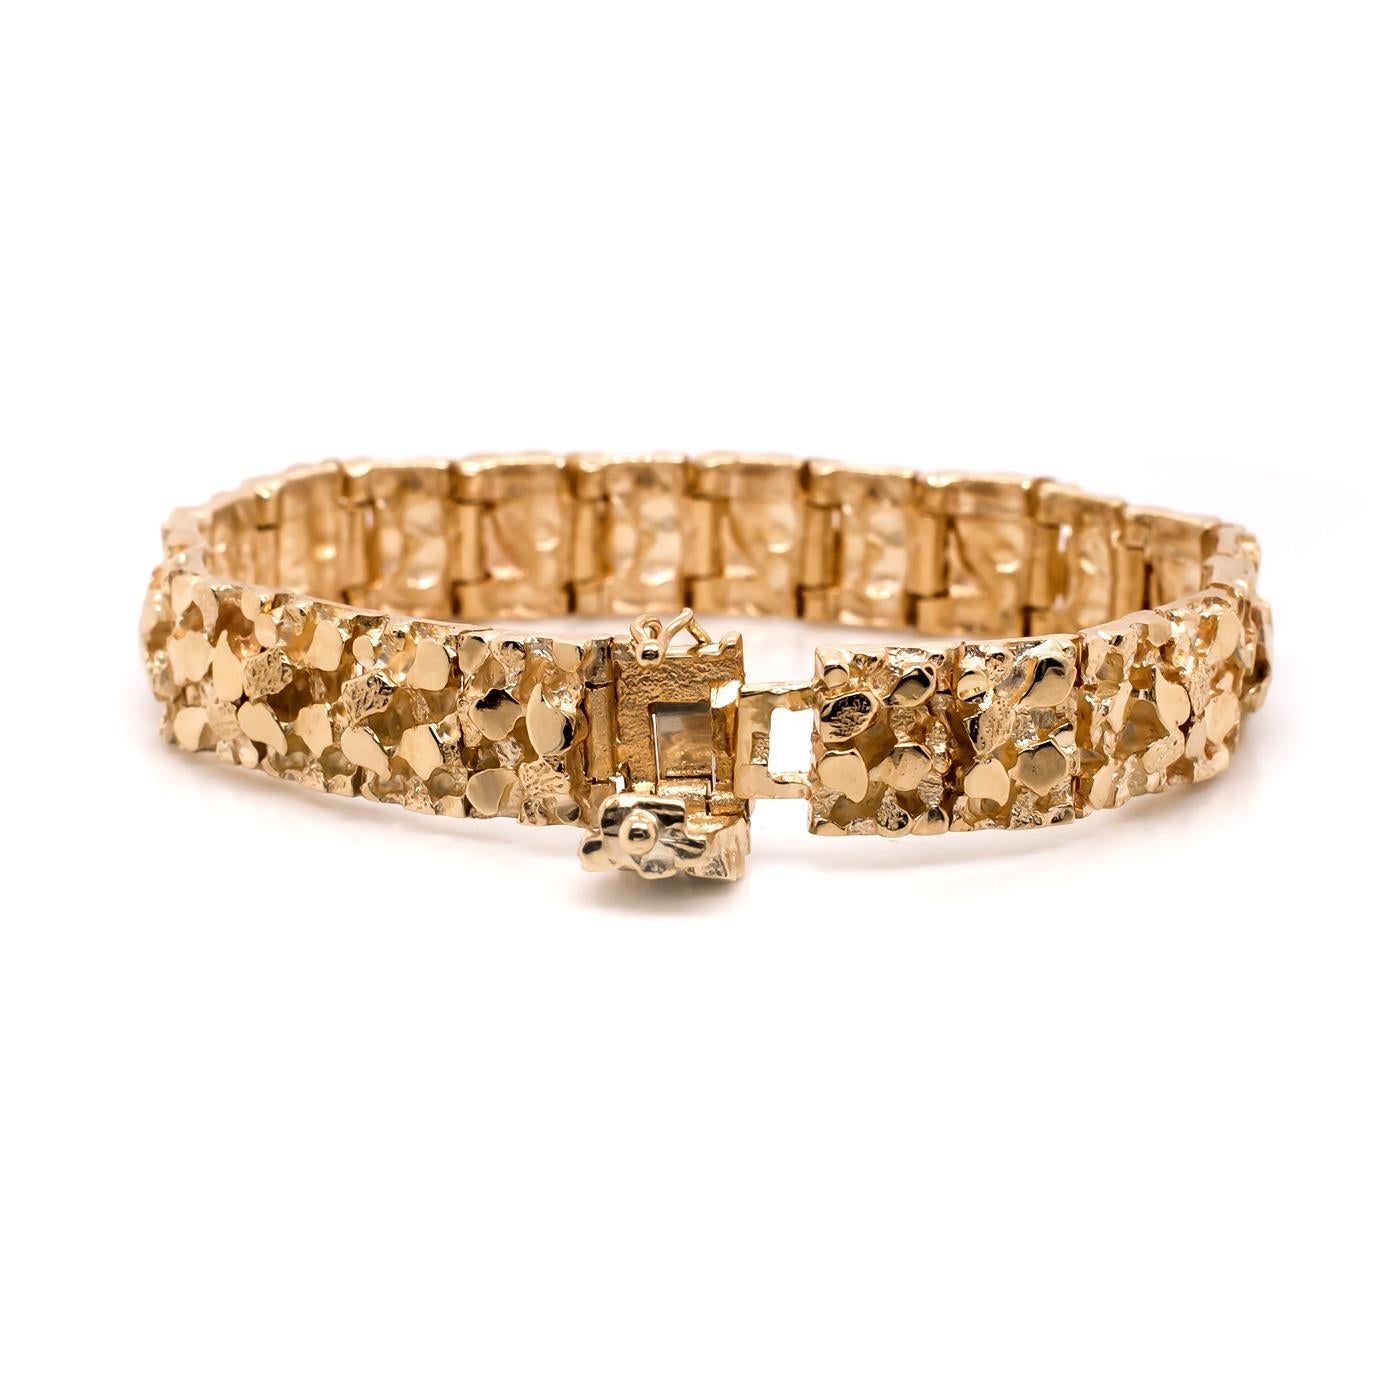 This Bold Vintage 14 Karat Yellow Gold Nugget Bracelet is the greatest statement piece. It is in twenty-three (23) gold nugget link segments allowing for flexibility and comfort all the way around. Measuring 7'' but  can be sized down in size prior